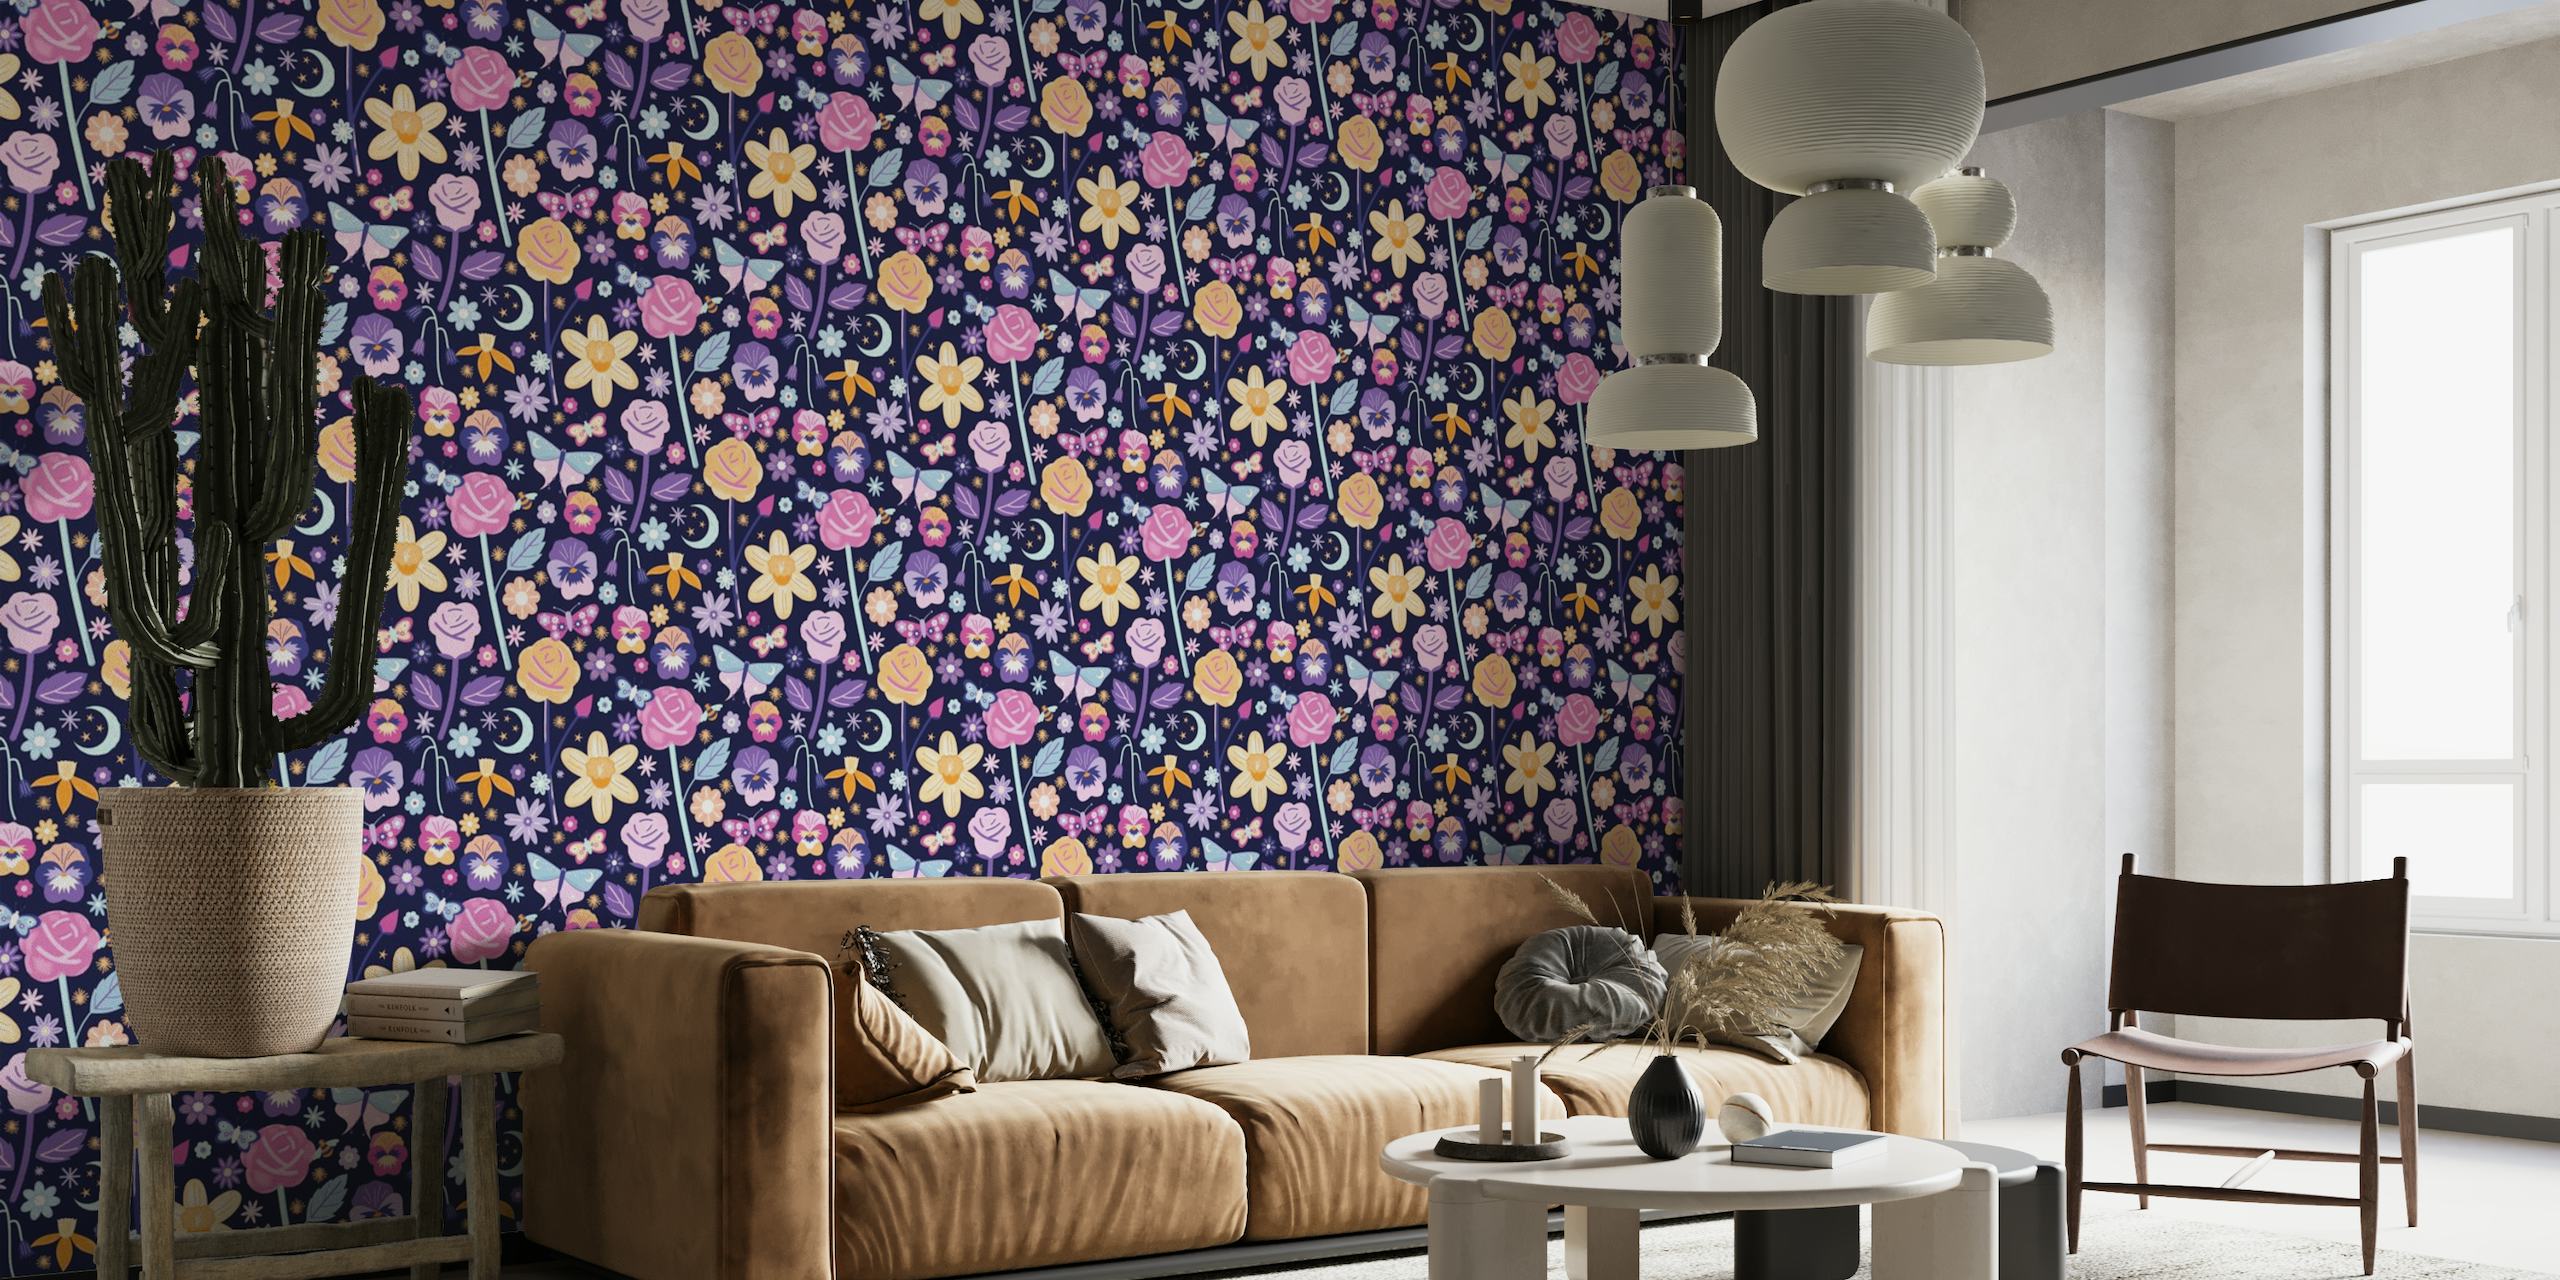 Floral pattern wall mural with roses and butterflies on a moonlit background